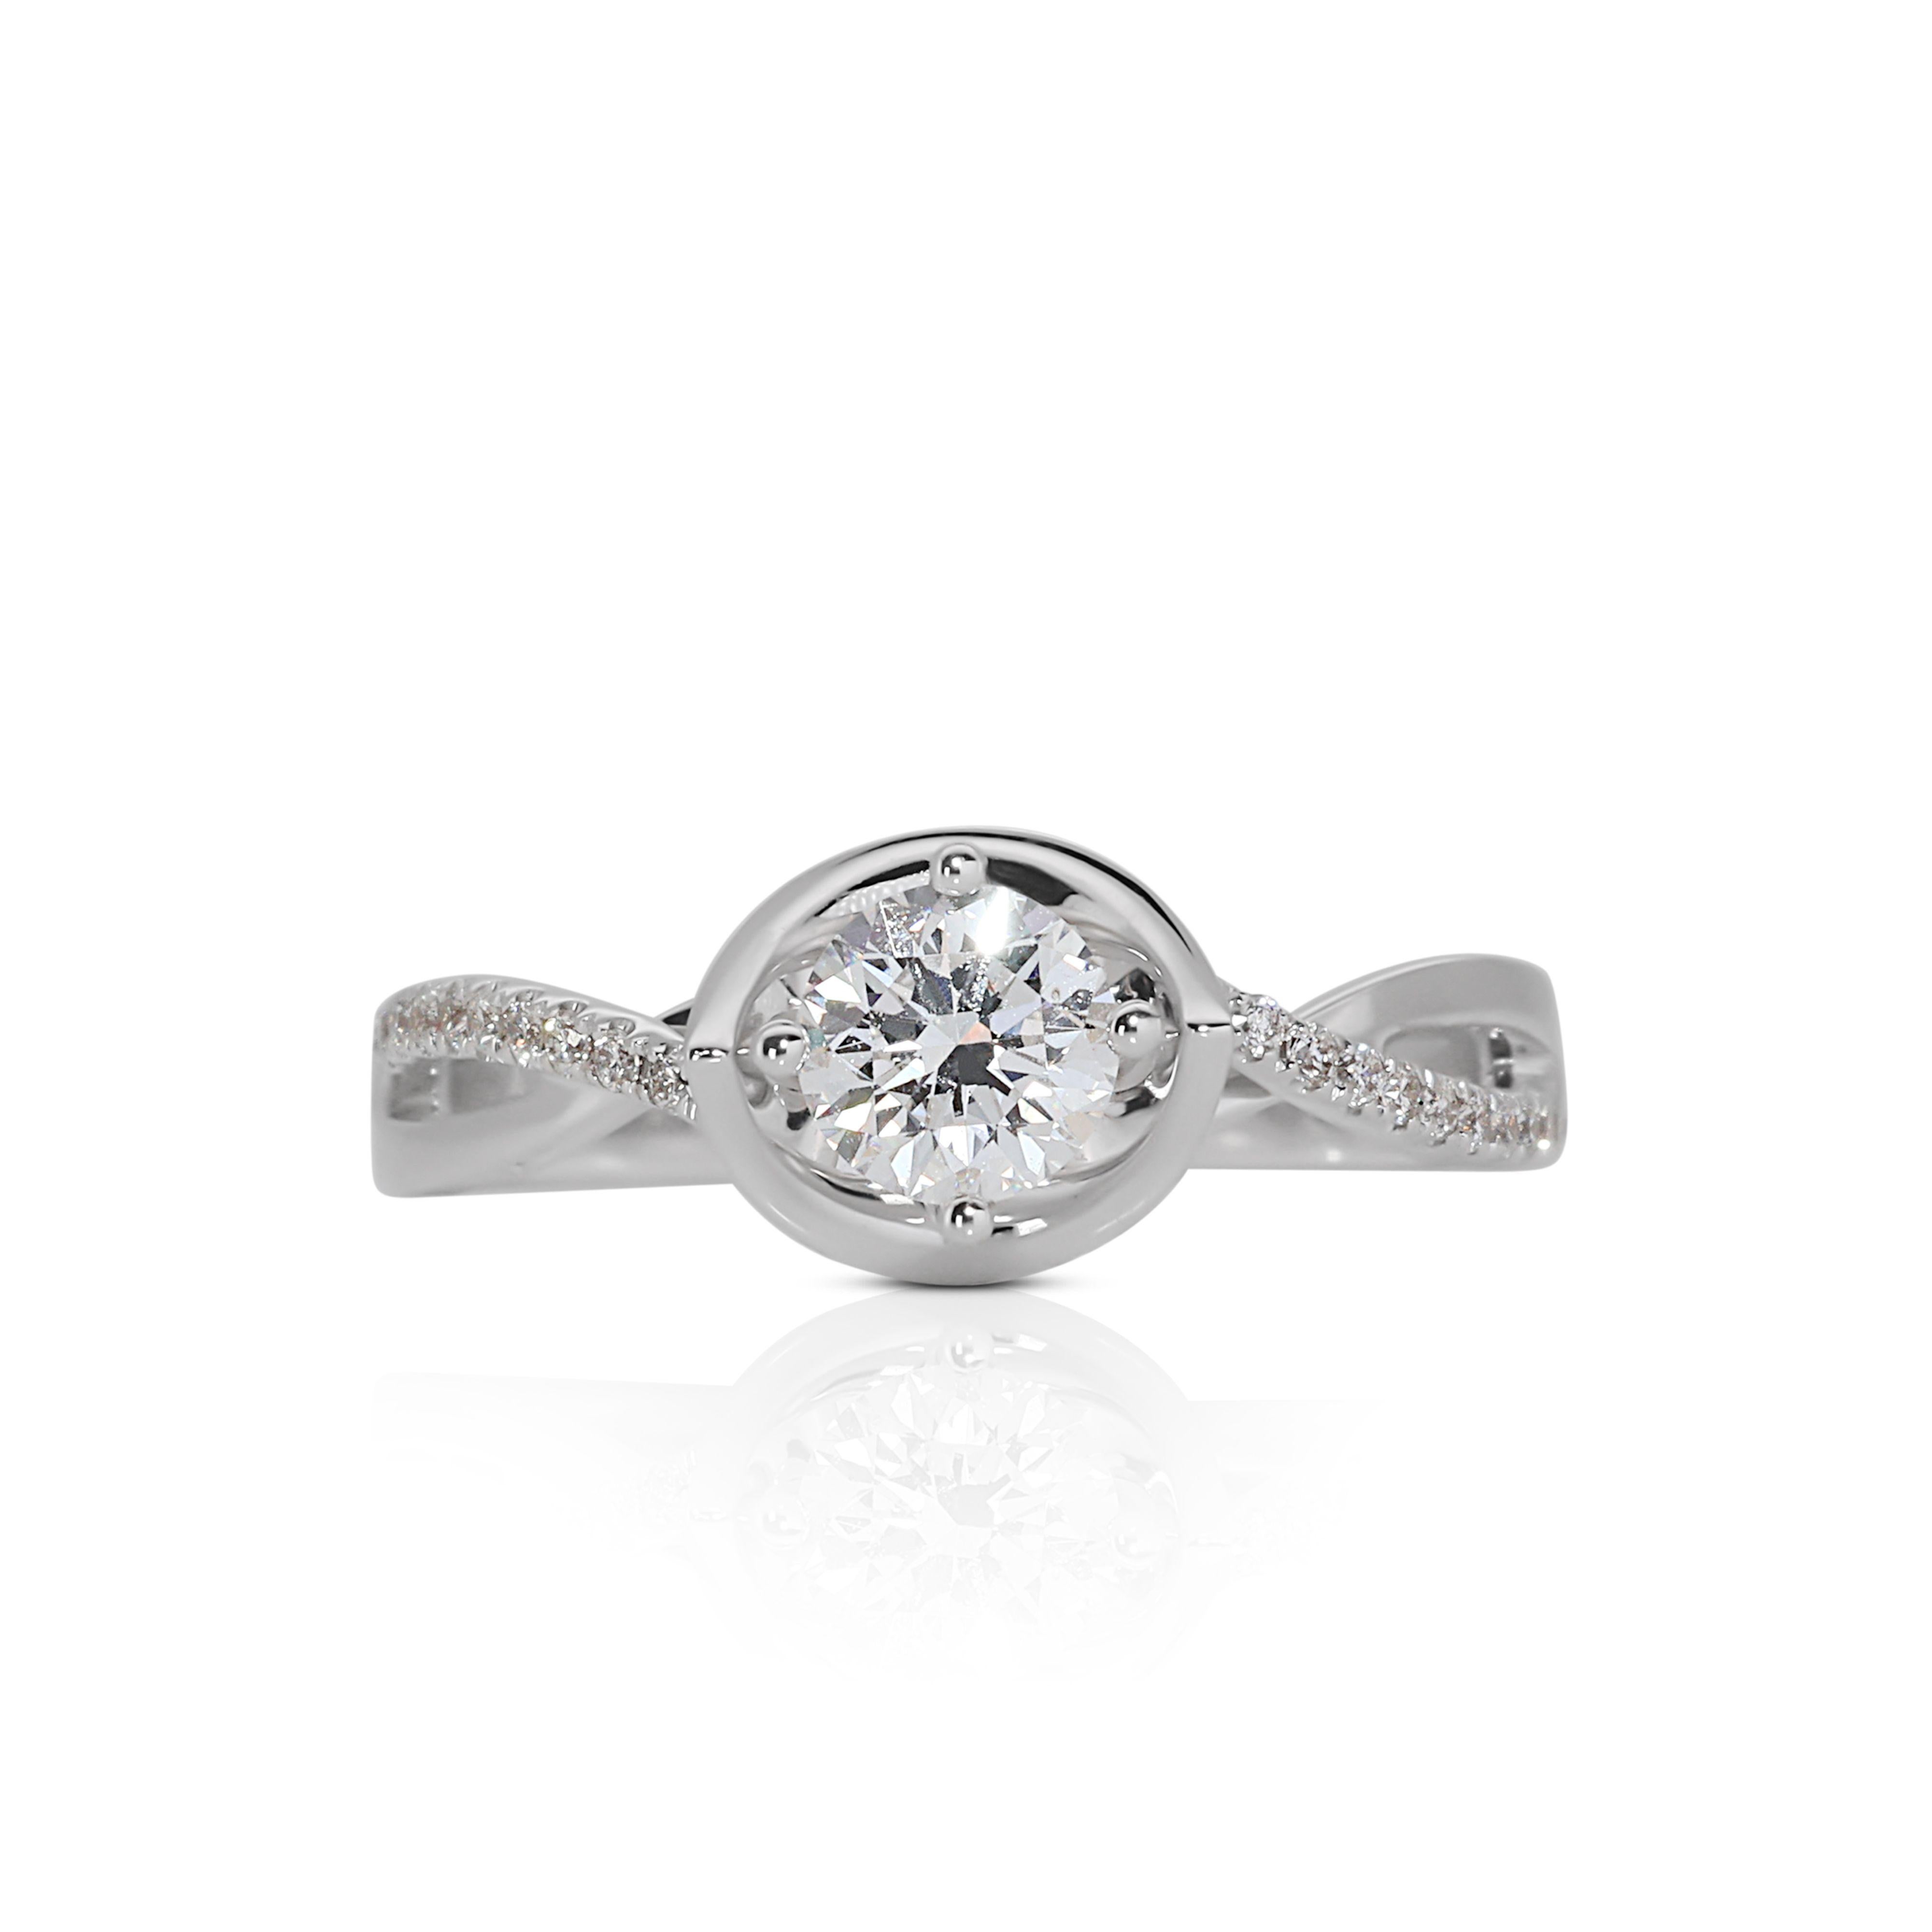 Beautiful 18K White Gold Halo Diamond Ring with 0.50ct Natural Diamond

This Beautiful 0.50ct Halo Diamond Ring in 18K White Gold is a truly mesmerizing and elegant piece of jewelry that seamlessly combines the timeless allure of a halo setting with